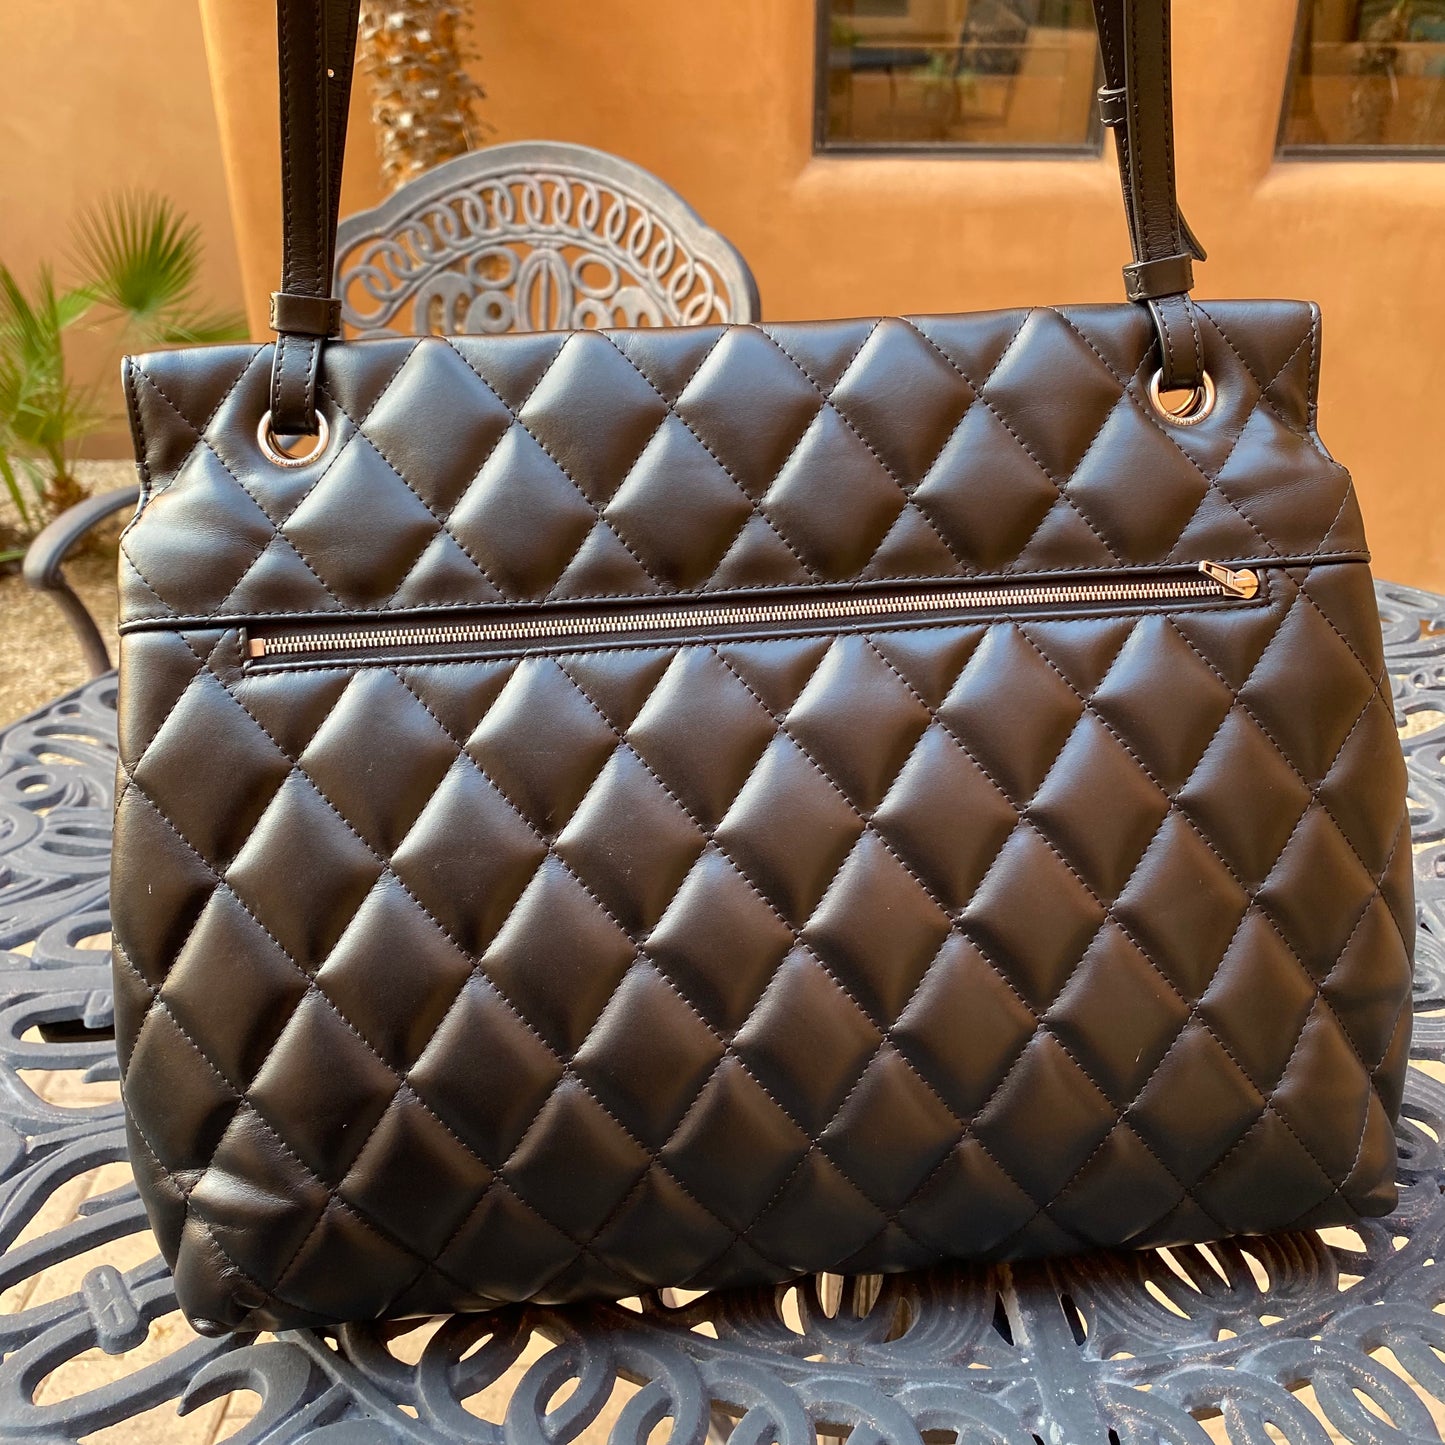 Balenciaga Large Touch Puffy B. Quilted Leather Shoulder Bag